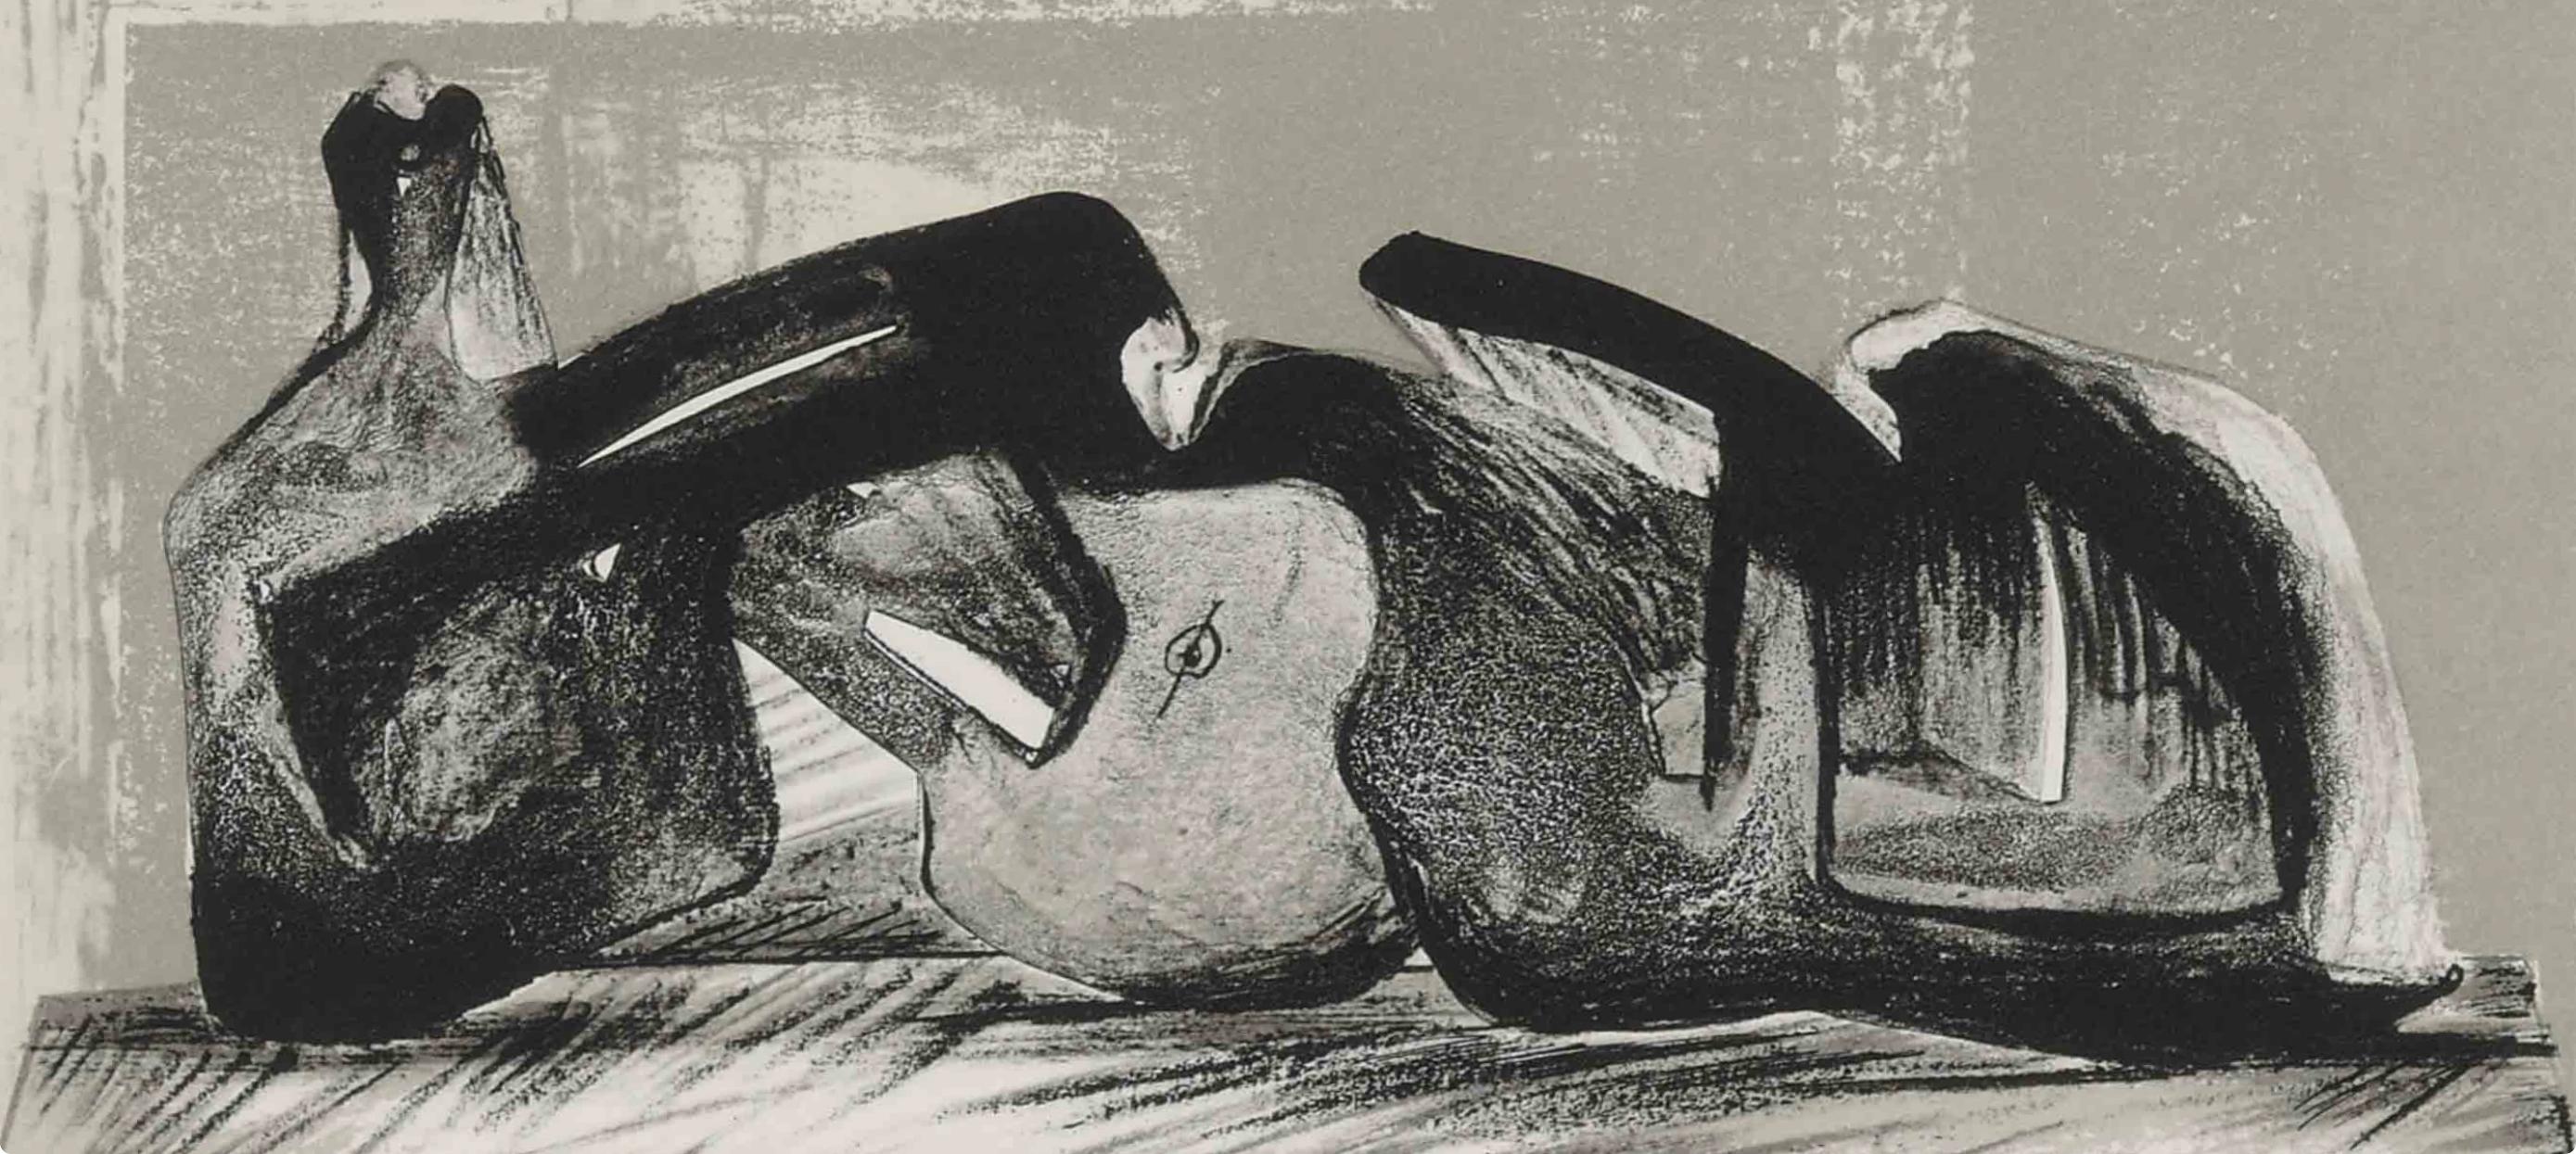 Moore, Reclining Figure, Interior Setting I (Cramer 458), XXe Siècle (after) - Print by Henry Moore